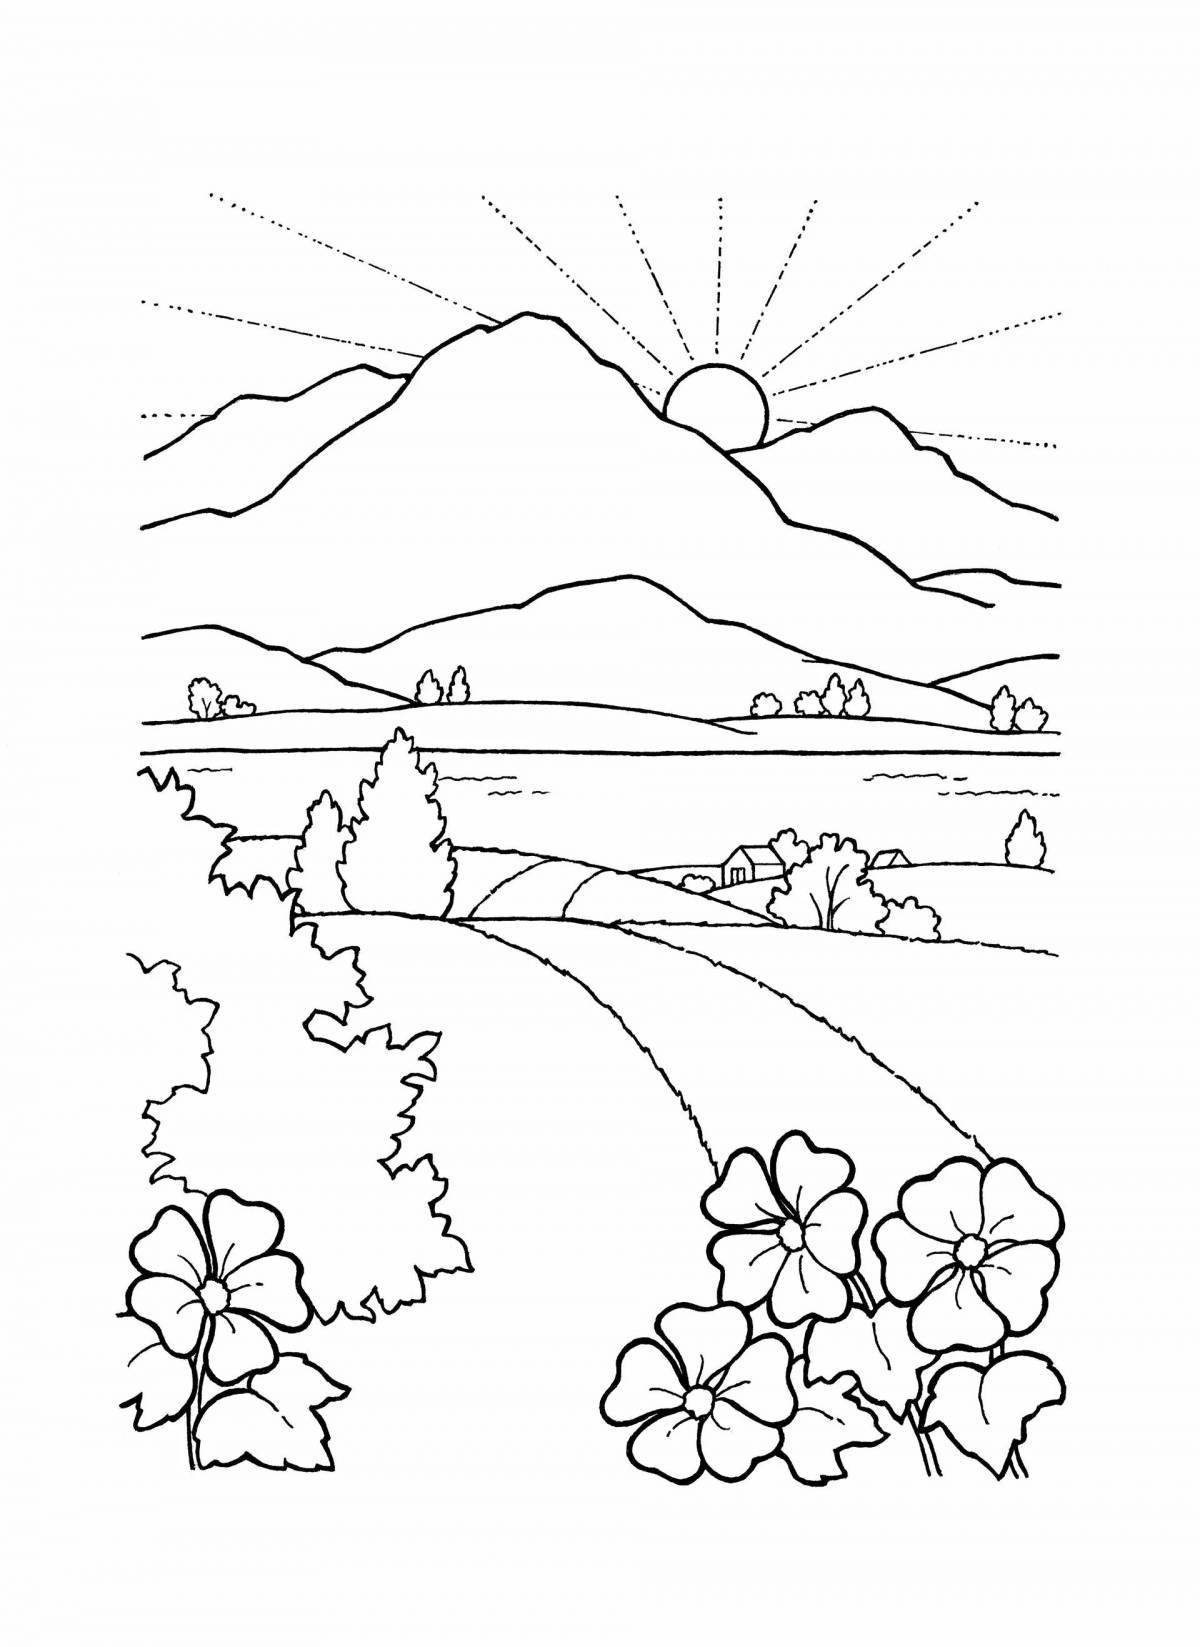 Bright nature of kazakhstan coloring pages for kids